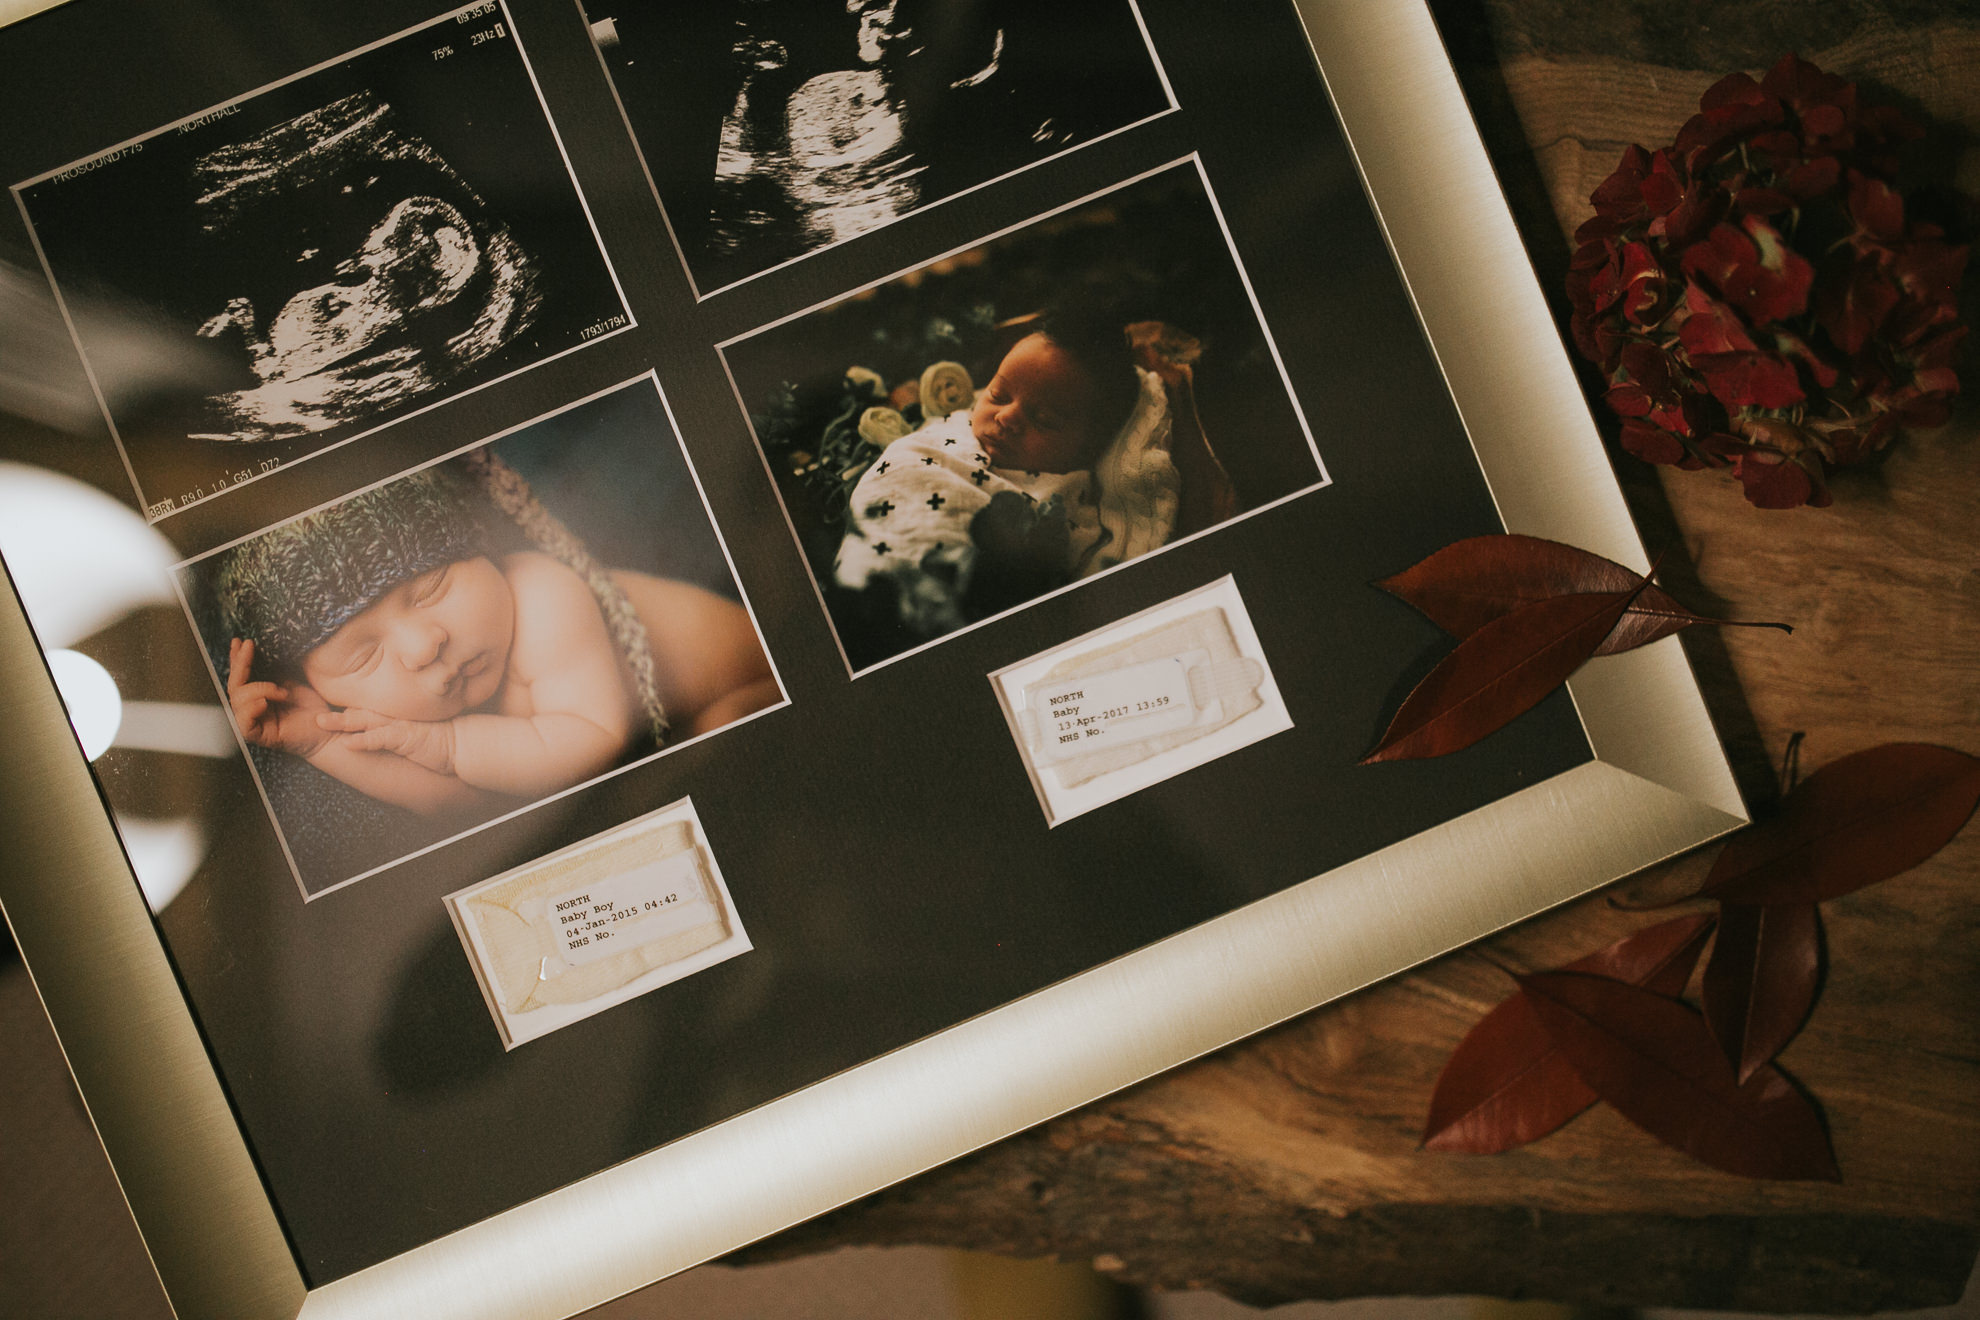 Ultra sound scan framed picture with hospital ID tag